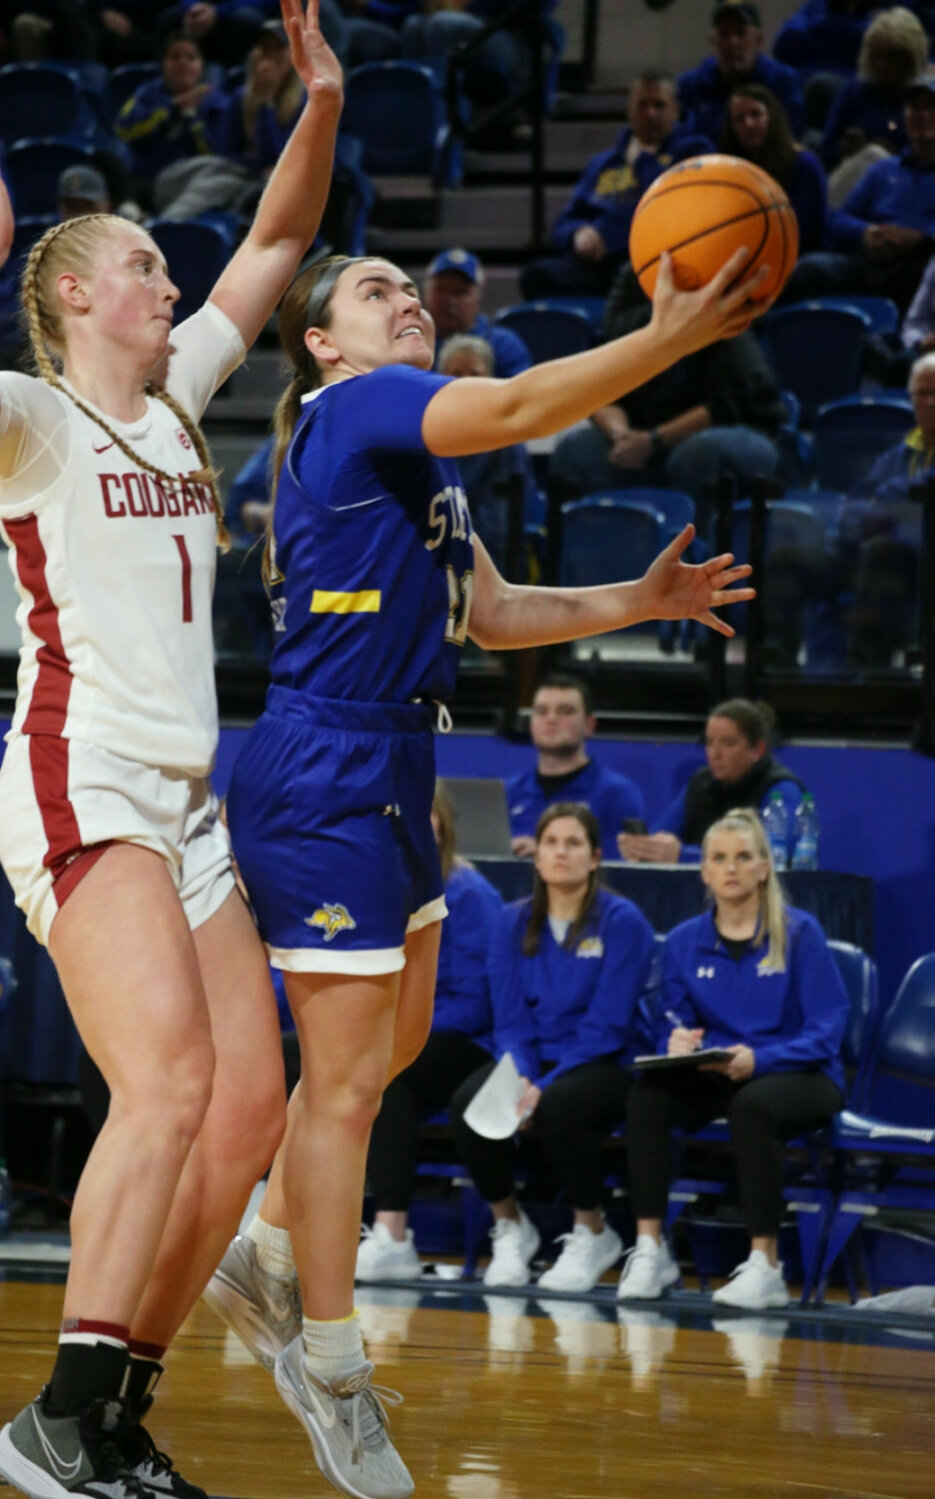 Jackrabbits guard Paige Meyer goes for a layup during the fourth quarter of a game against Washington State at Frost Arena in Brookings on Tuesday night. (Andrew Holtan/Brookings Register)